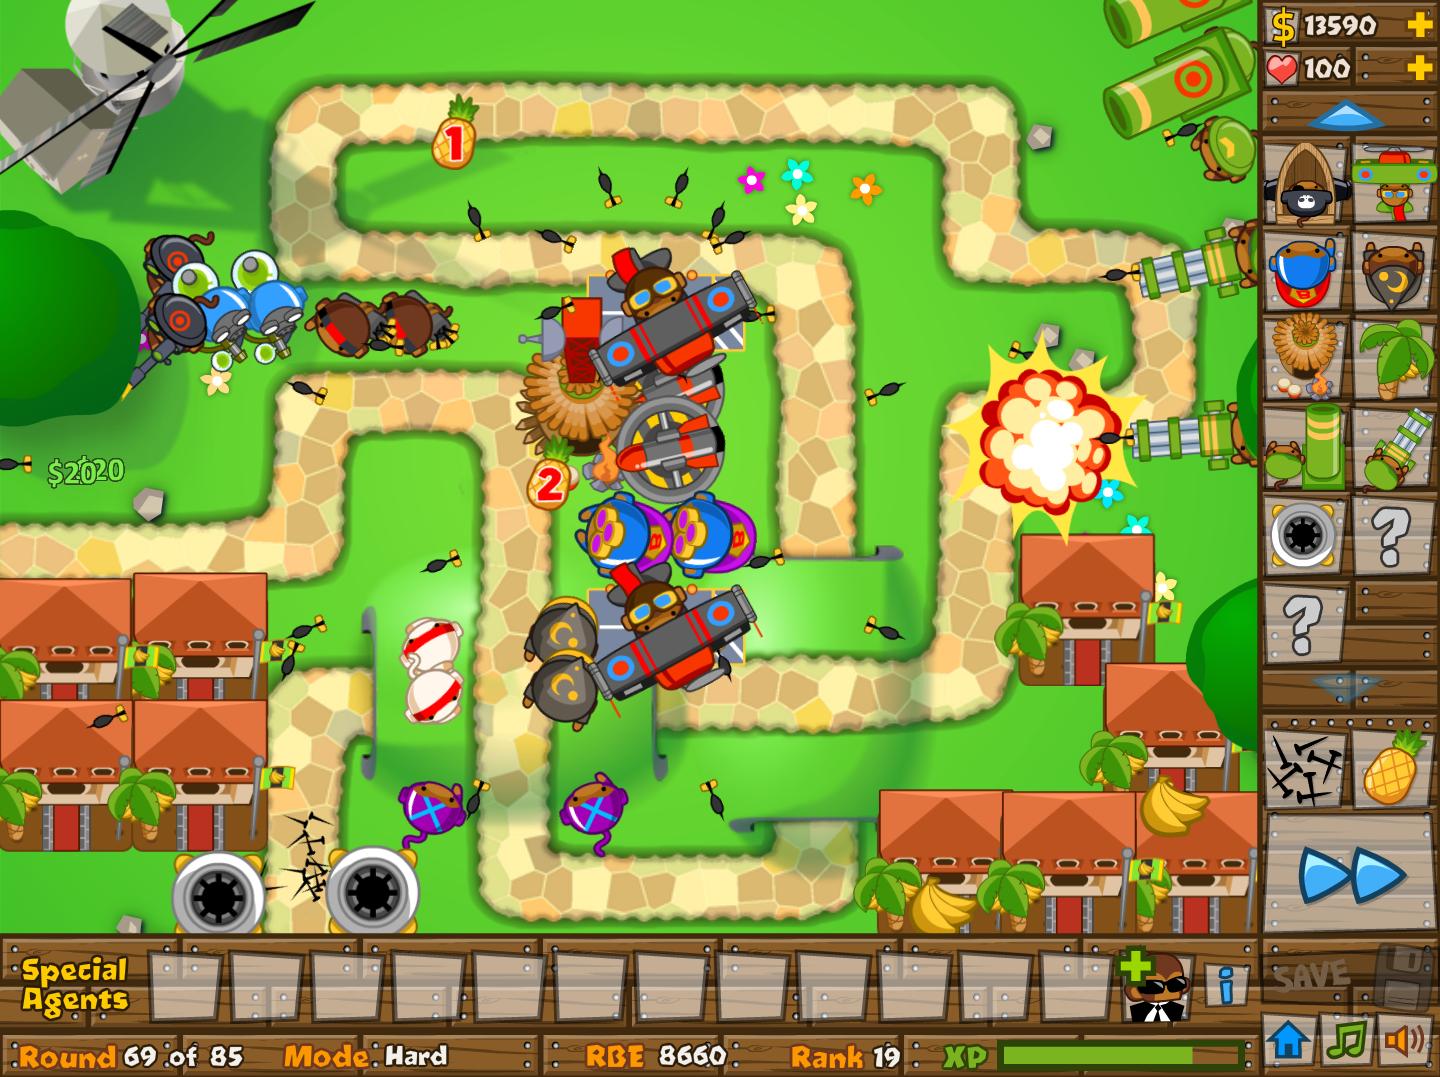 Ios Games Here: BLOONS TOWER DEFENSE 5 DELUXE FREE DOWNLOAD